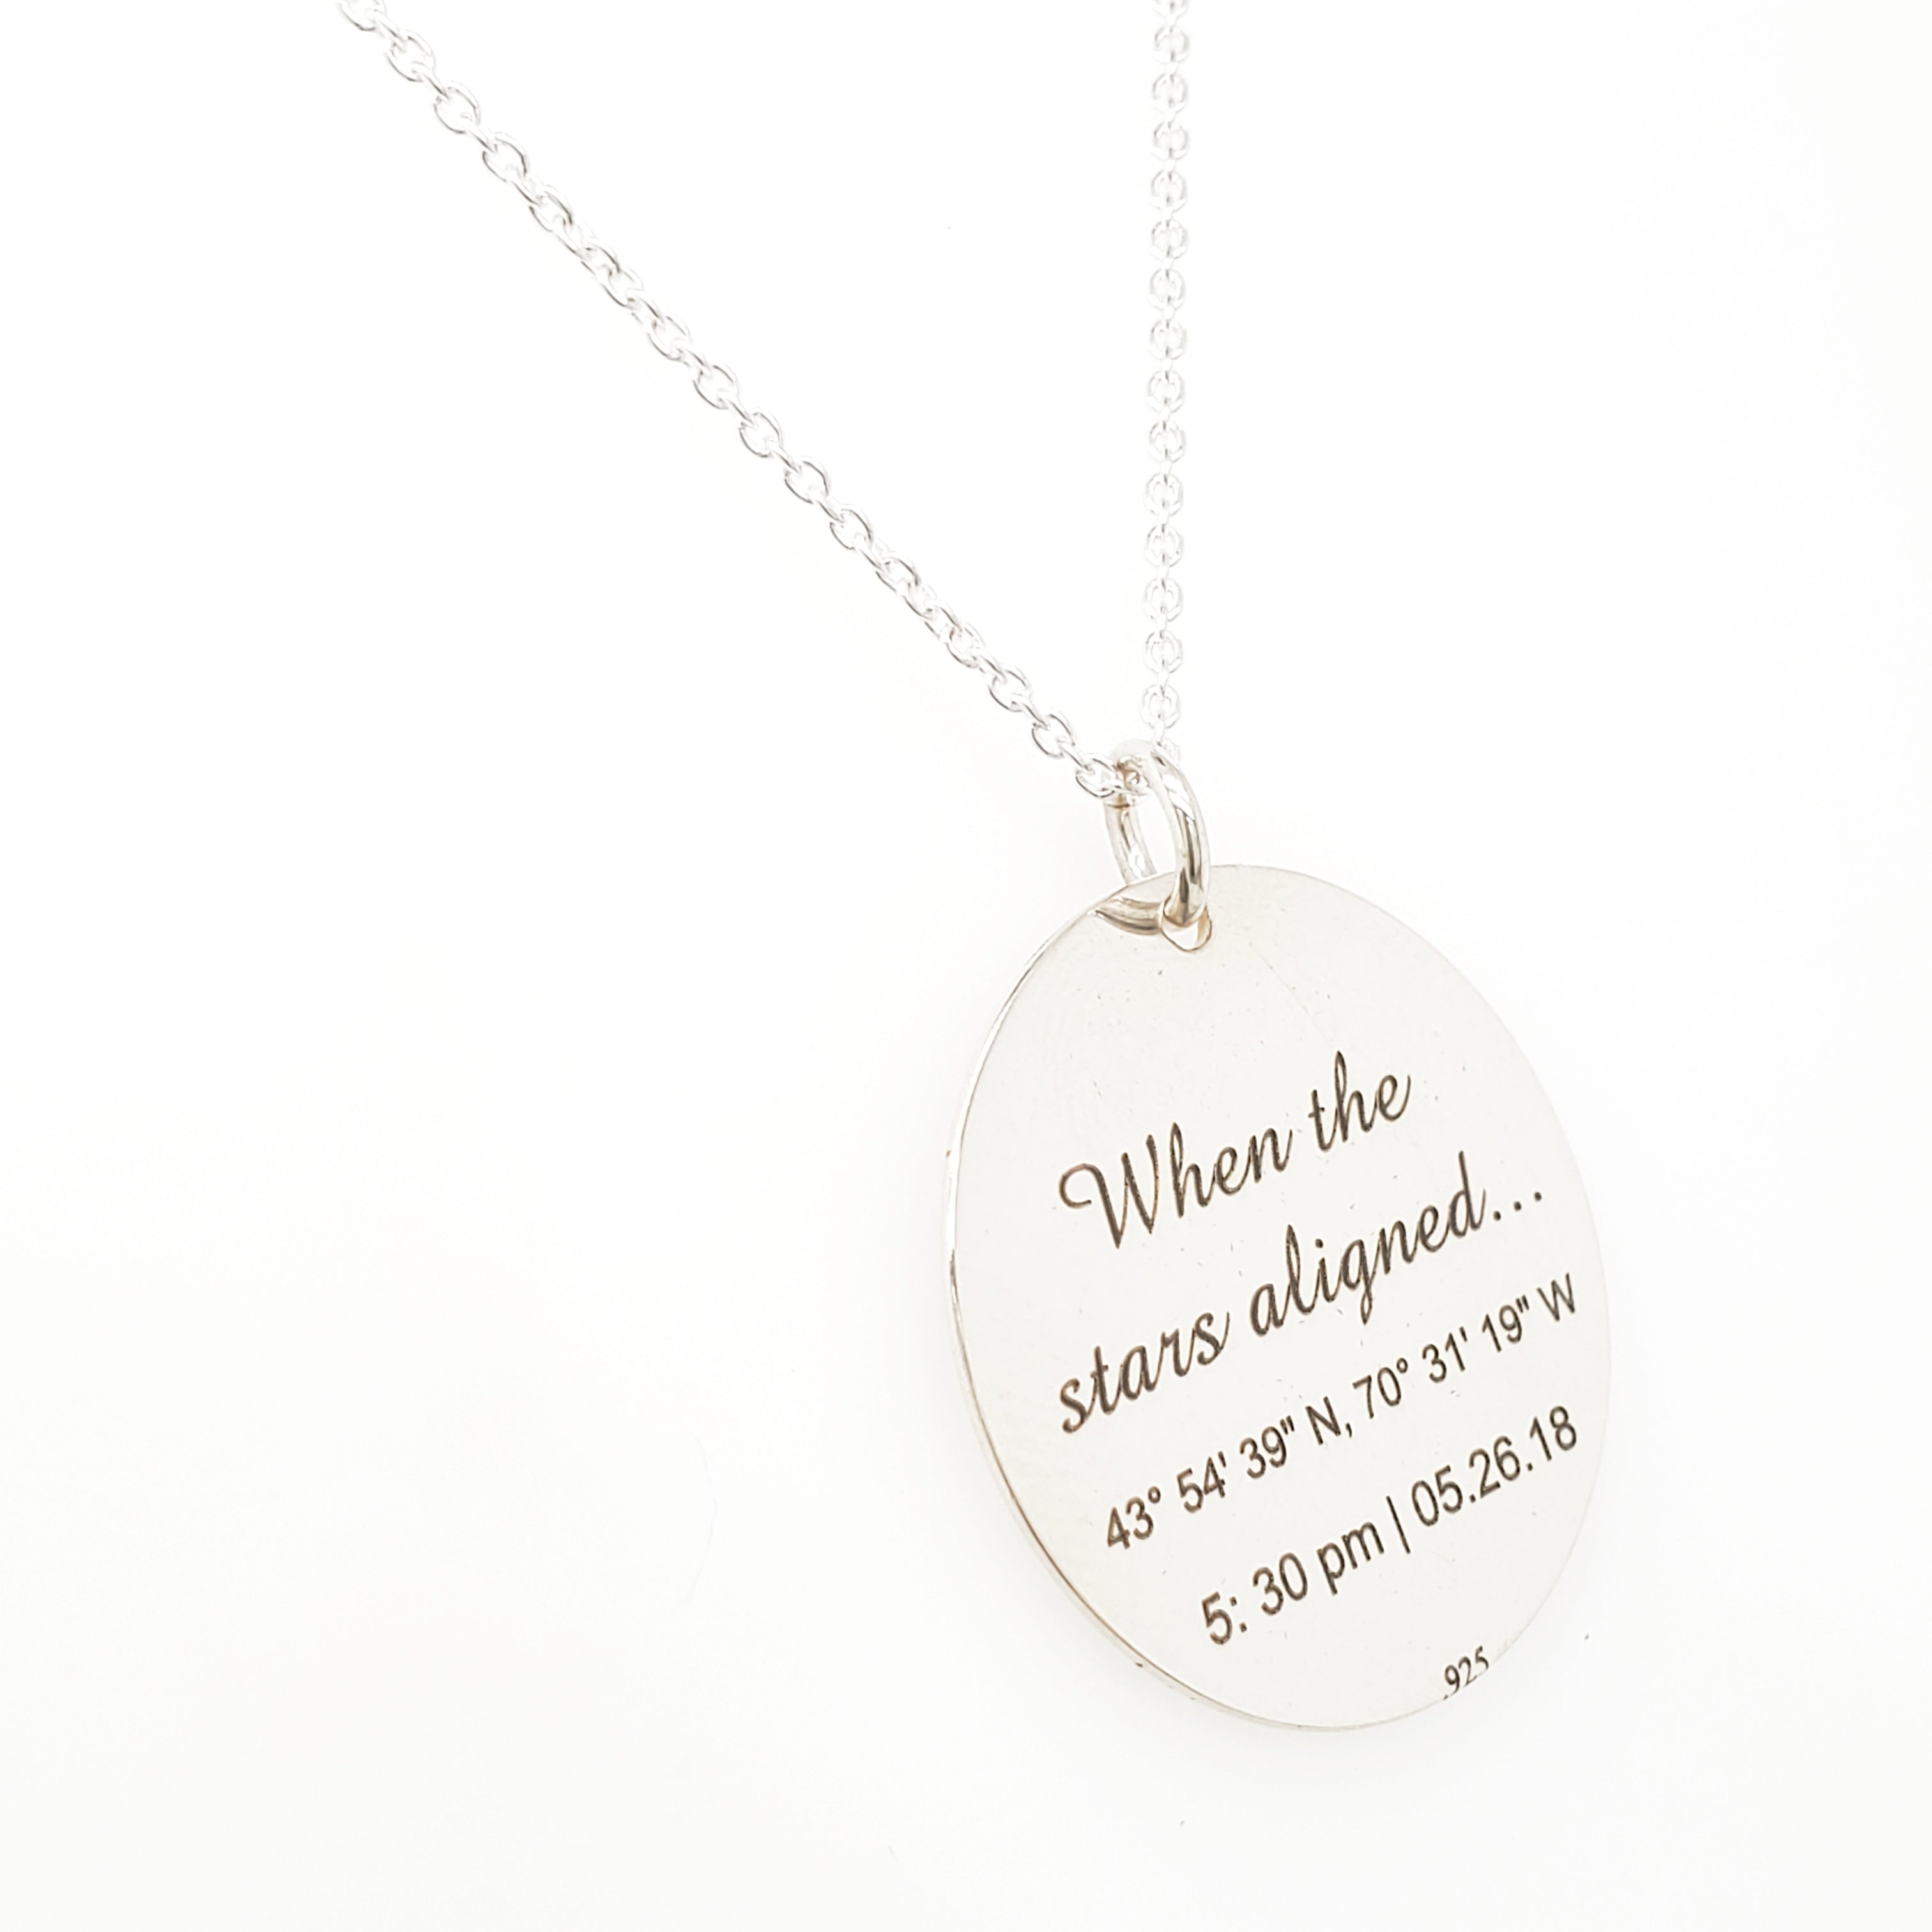 Custom Star Map Necklace in Sterling Silver by Lat & Lo. Custom back inscription example